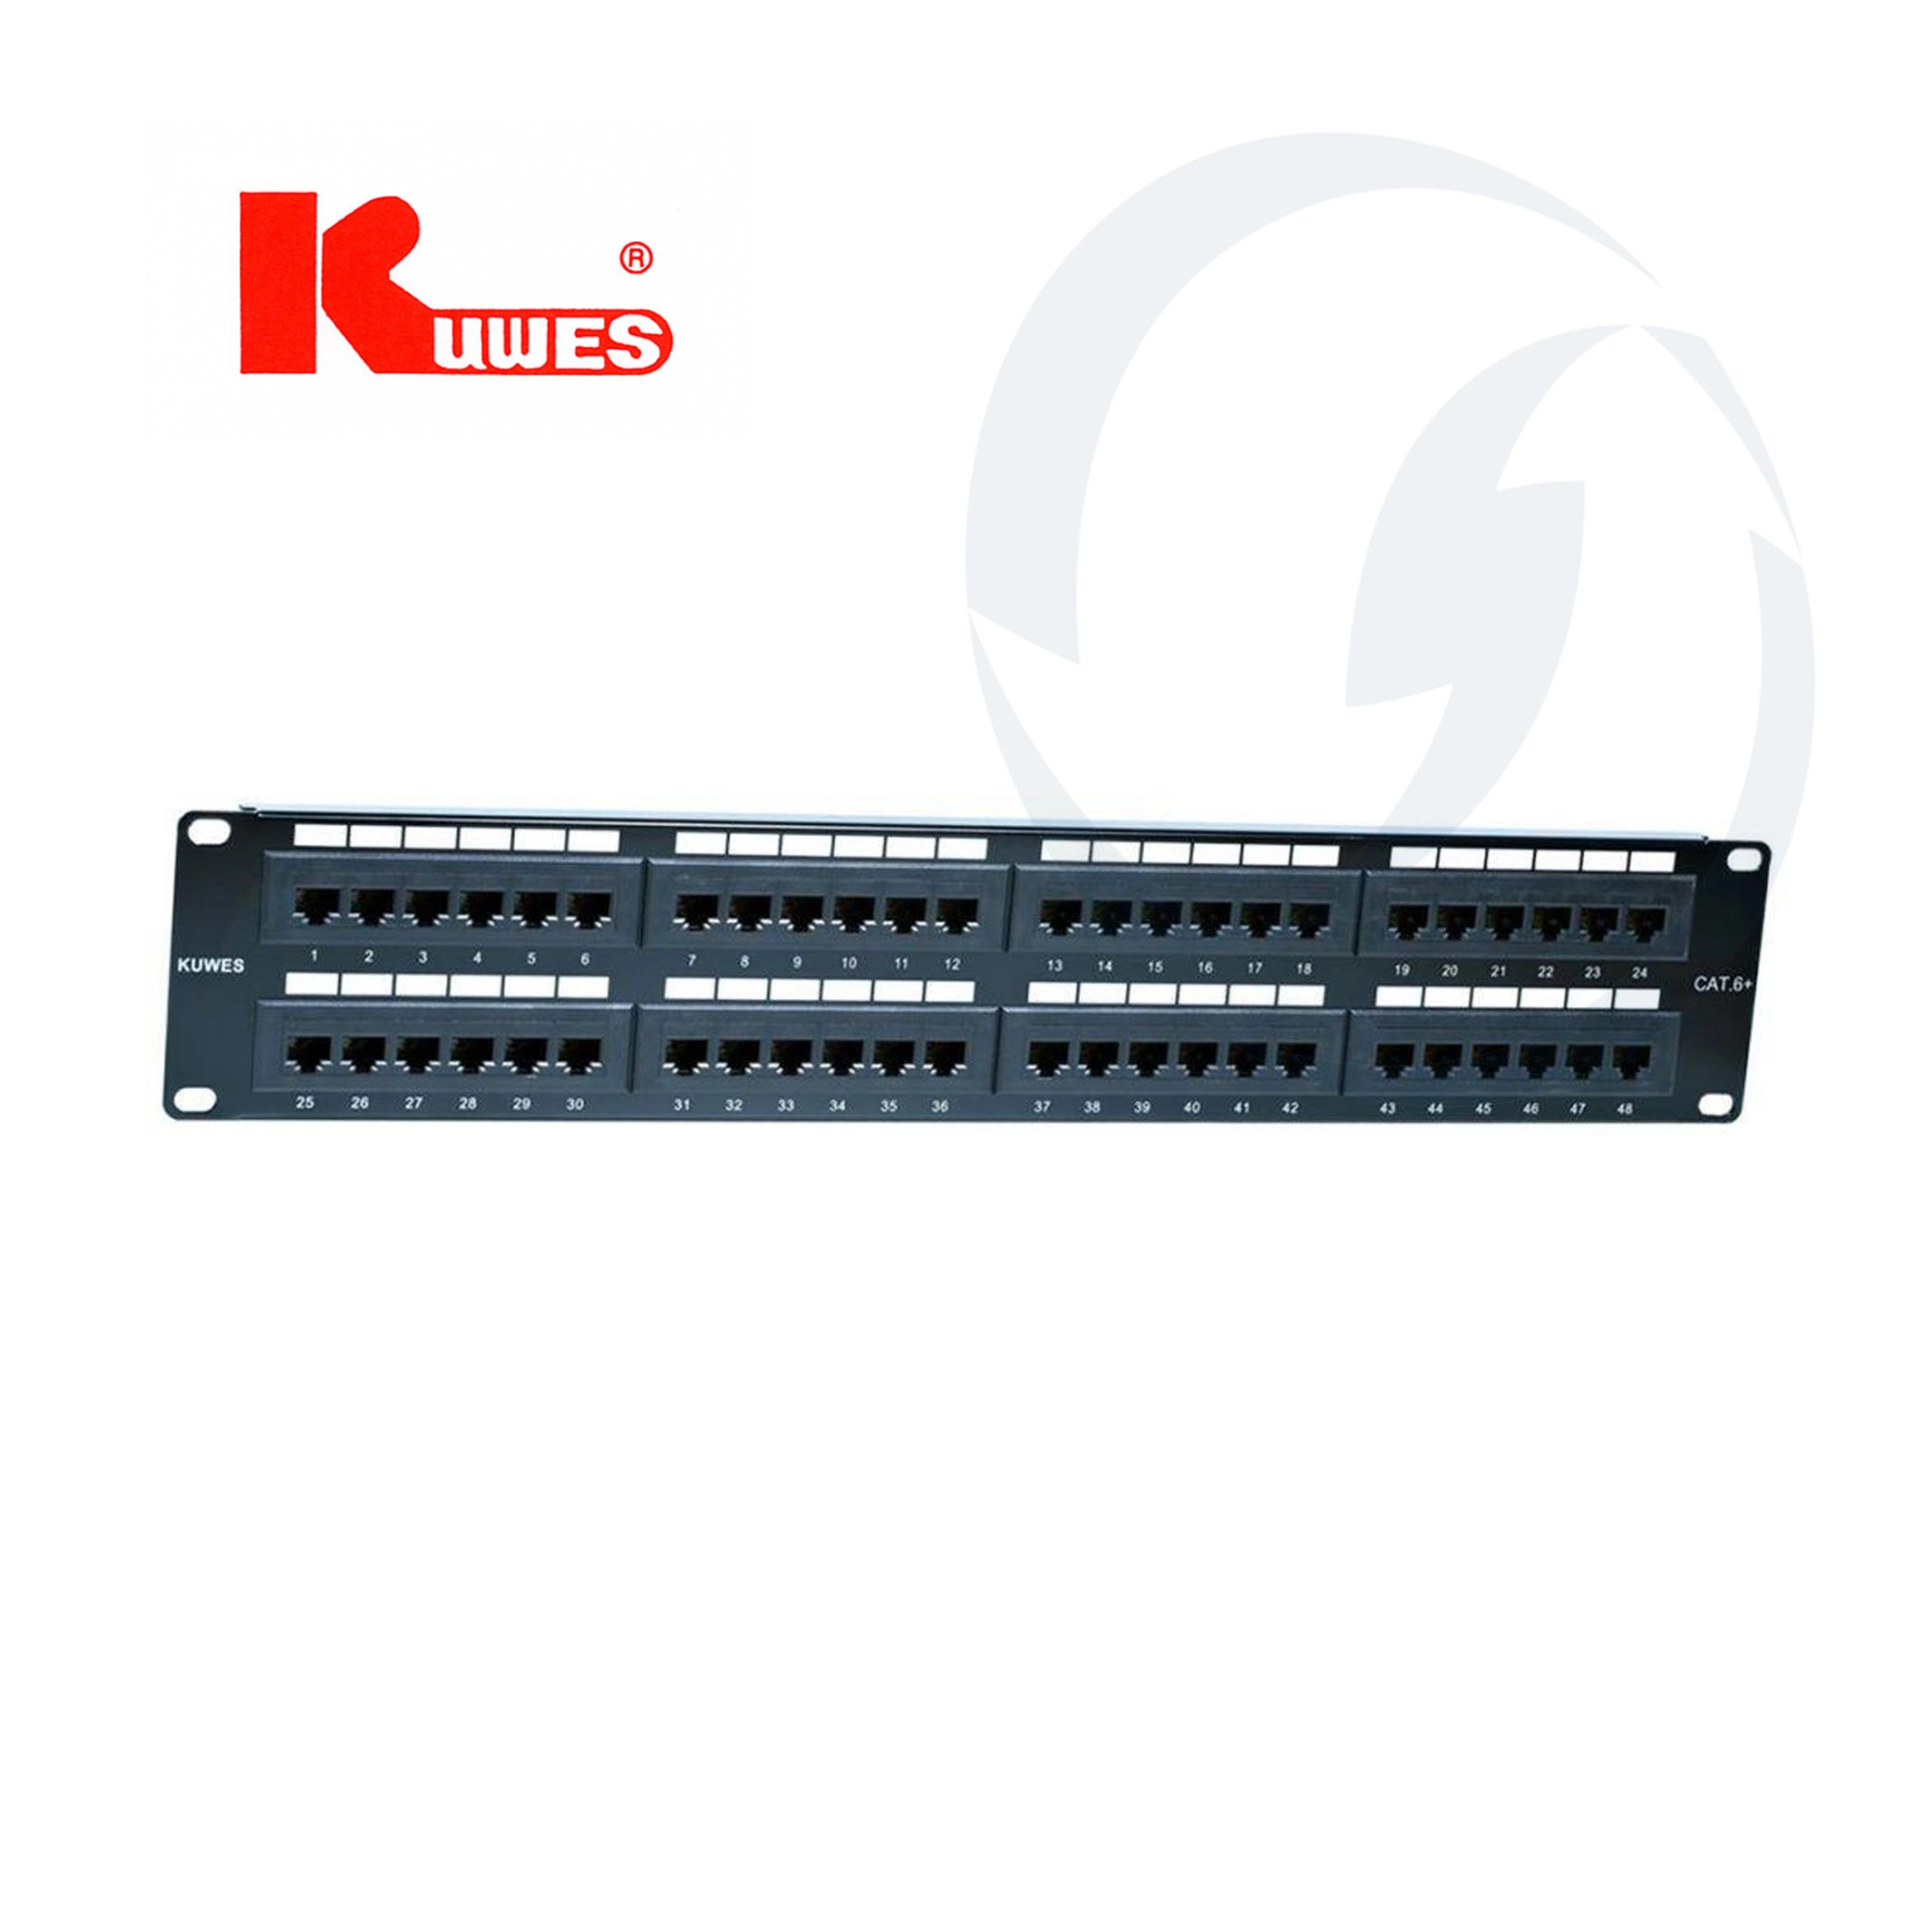 Patch-panel-48-portas-Cat6--KUWES-nampula-silvermoz-maputo-redes-mozambique